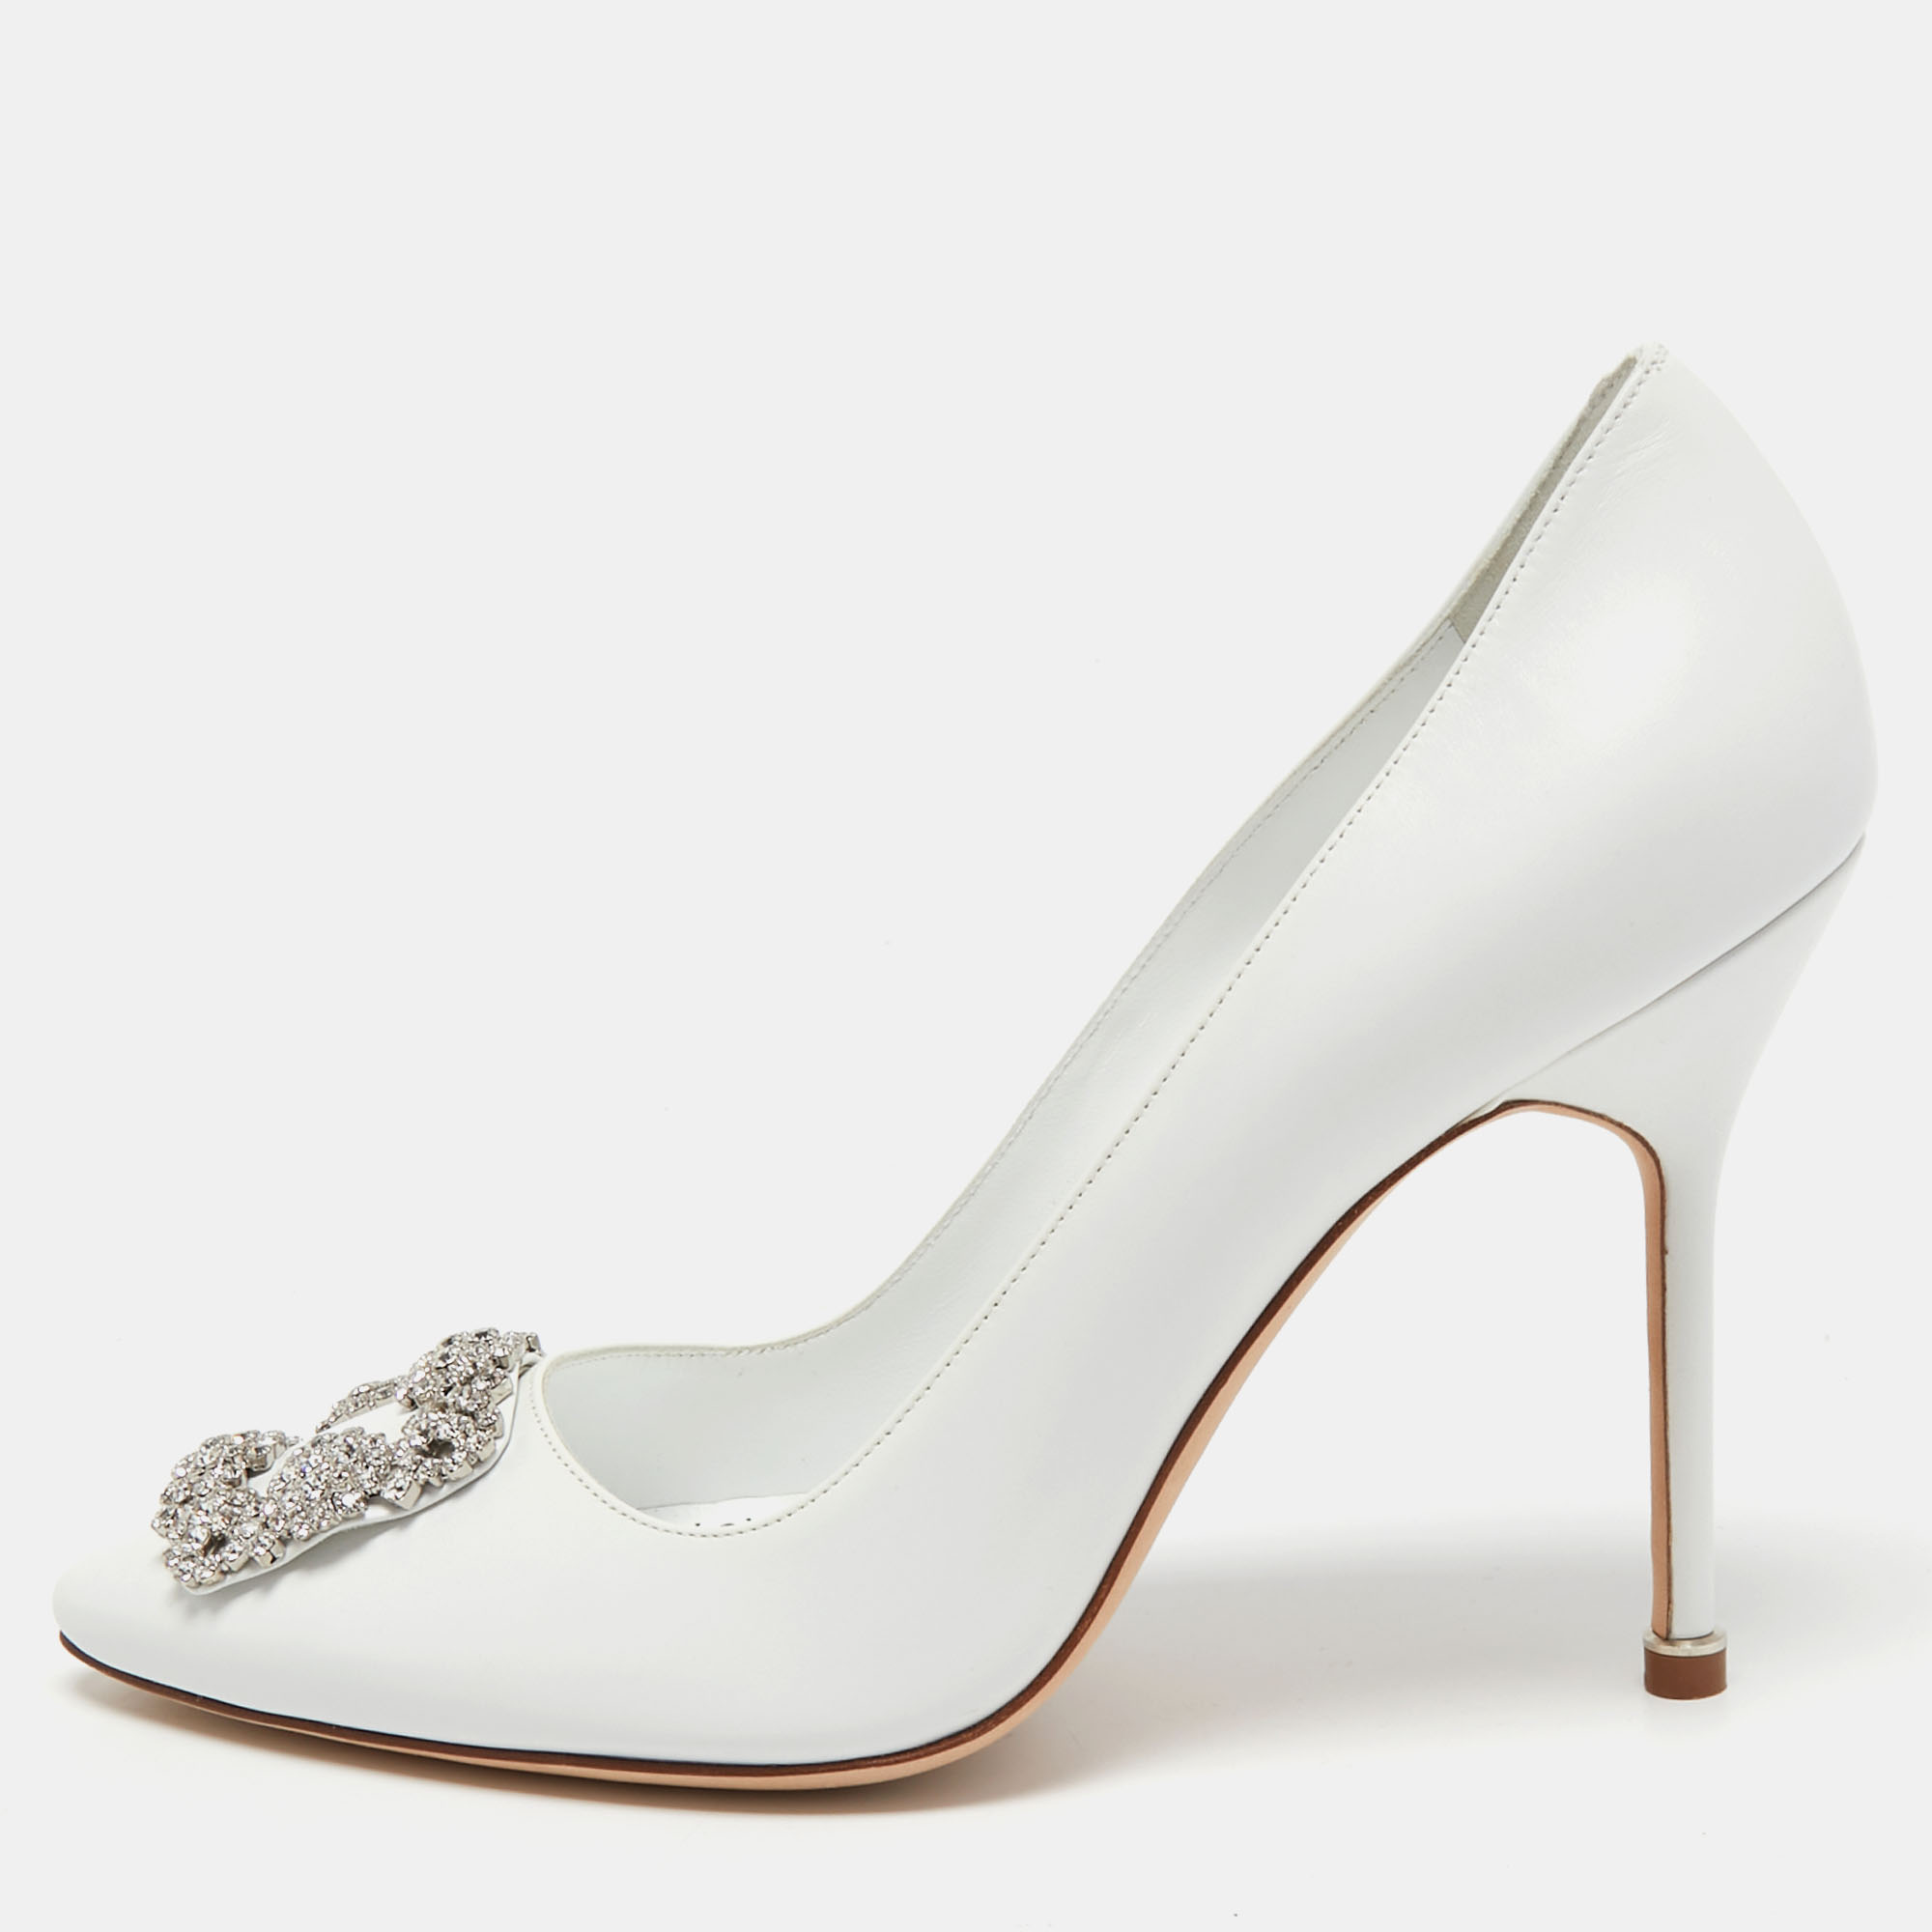 Pre-owned Manolo Blahnik White Leather Hangisi Pumps Size 40